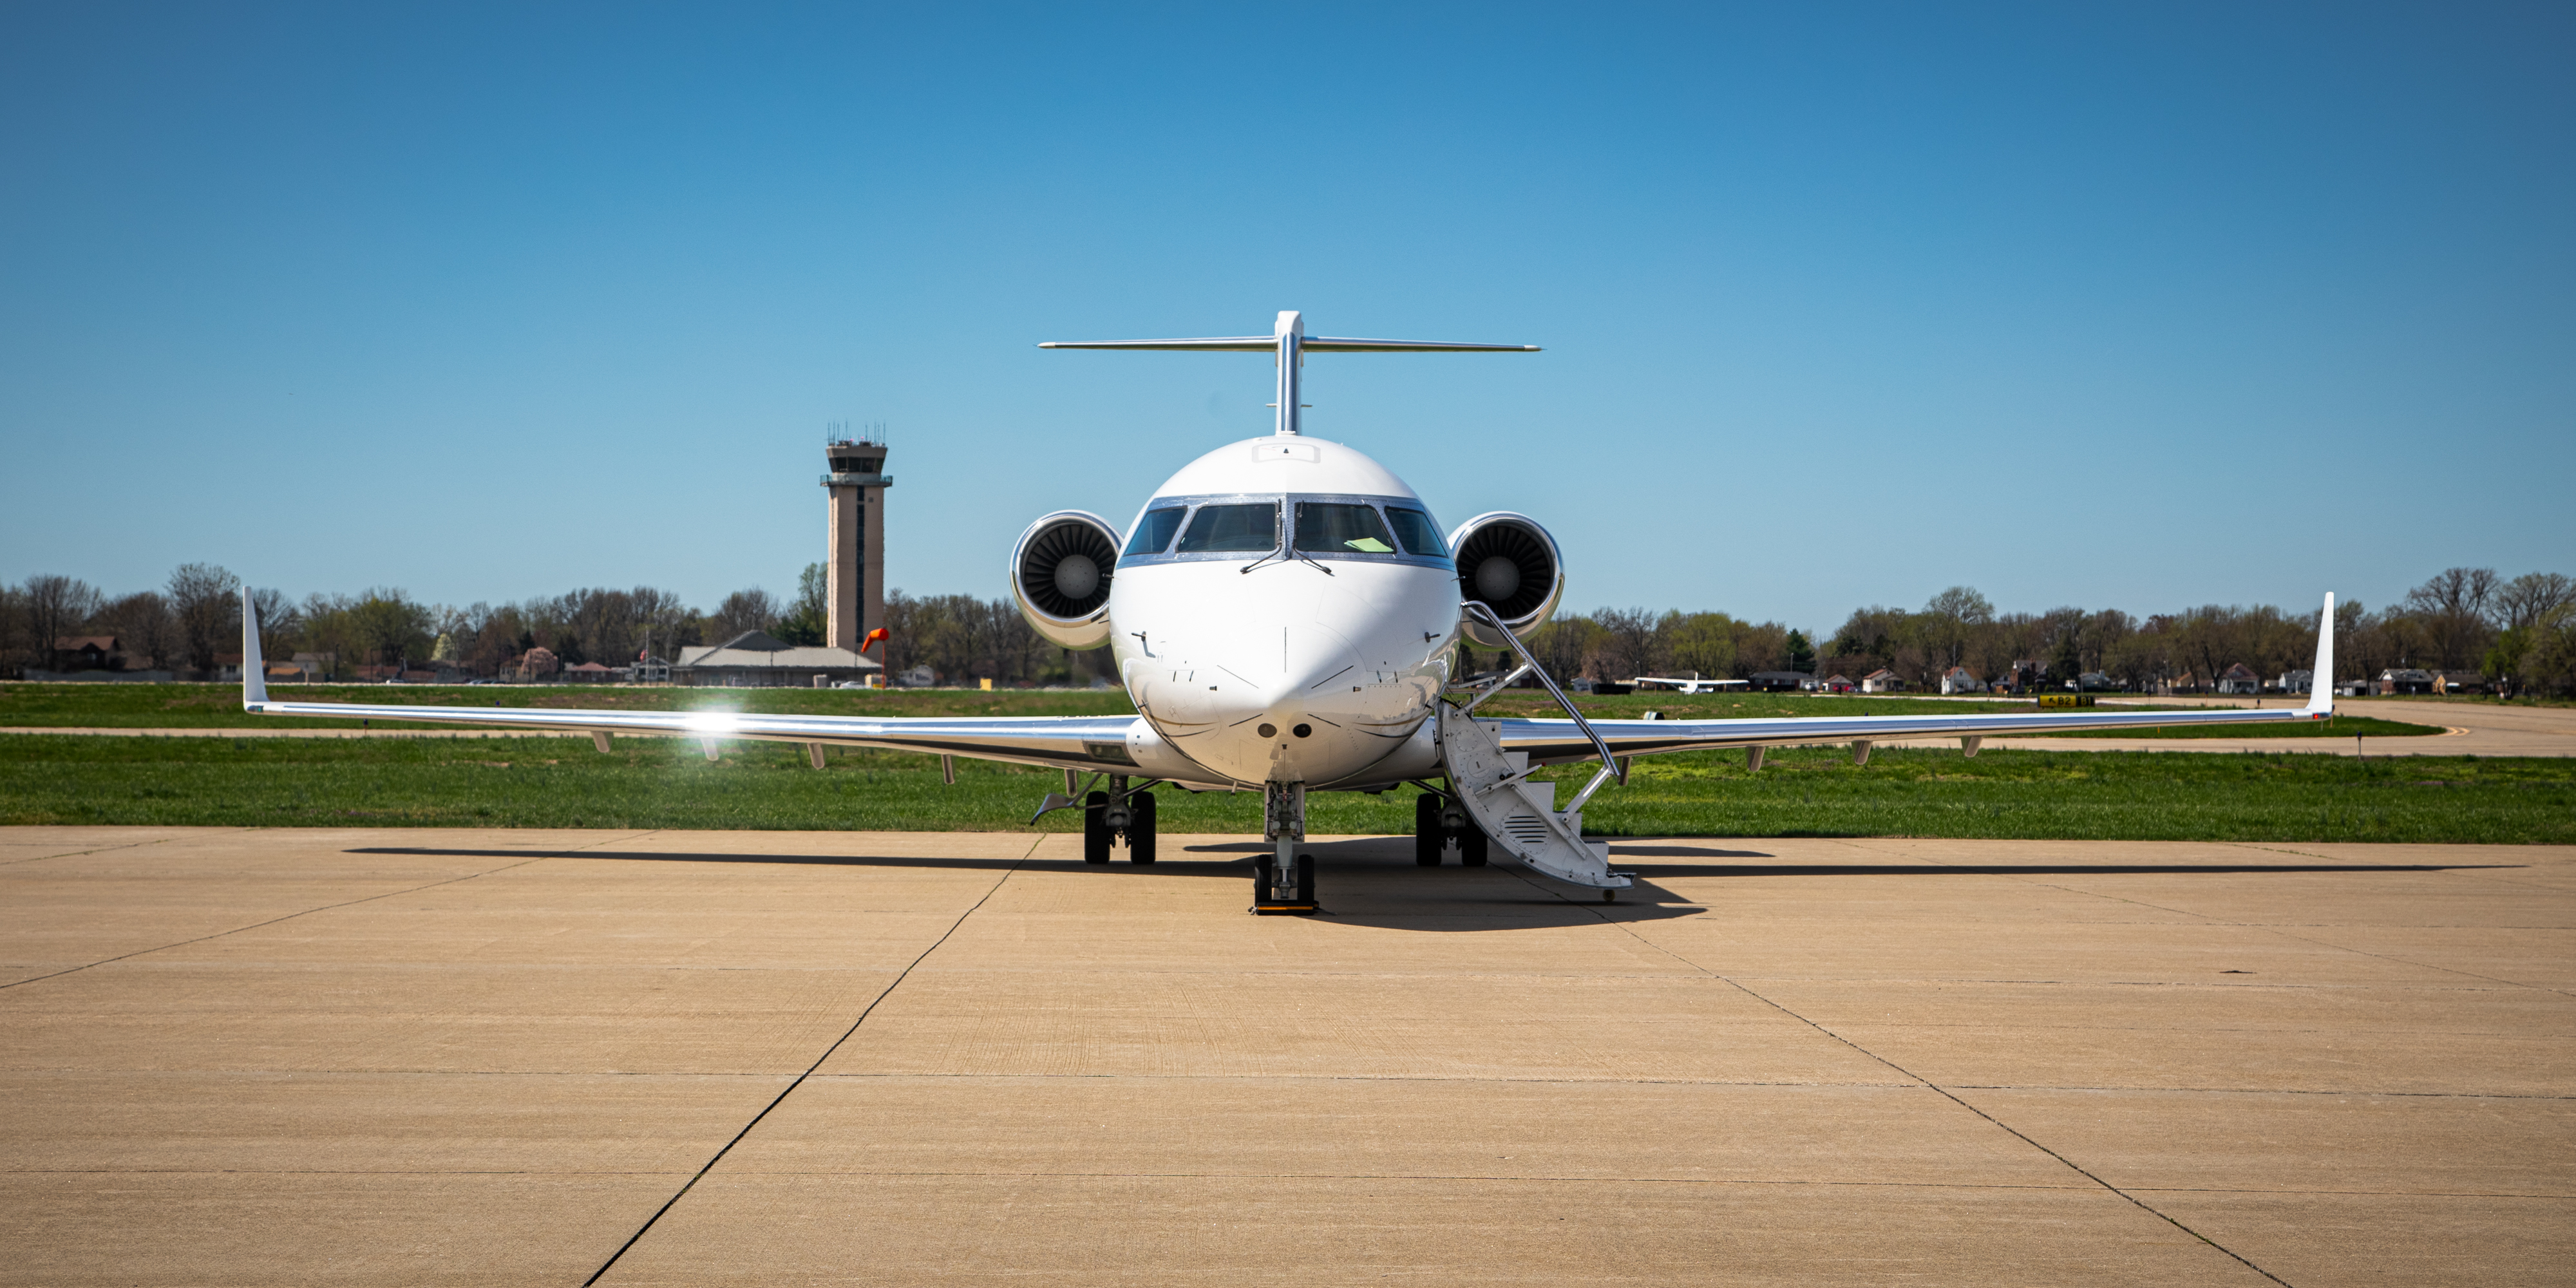 The Bombardier Challenger 850, ARM’s new research aircraft, is expected to be ready for its first science mission in 2023. 